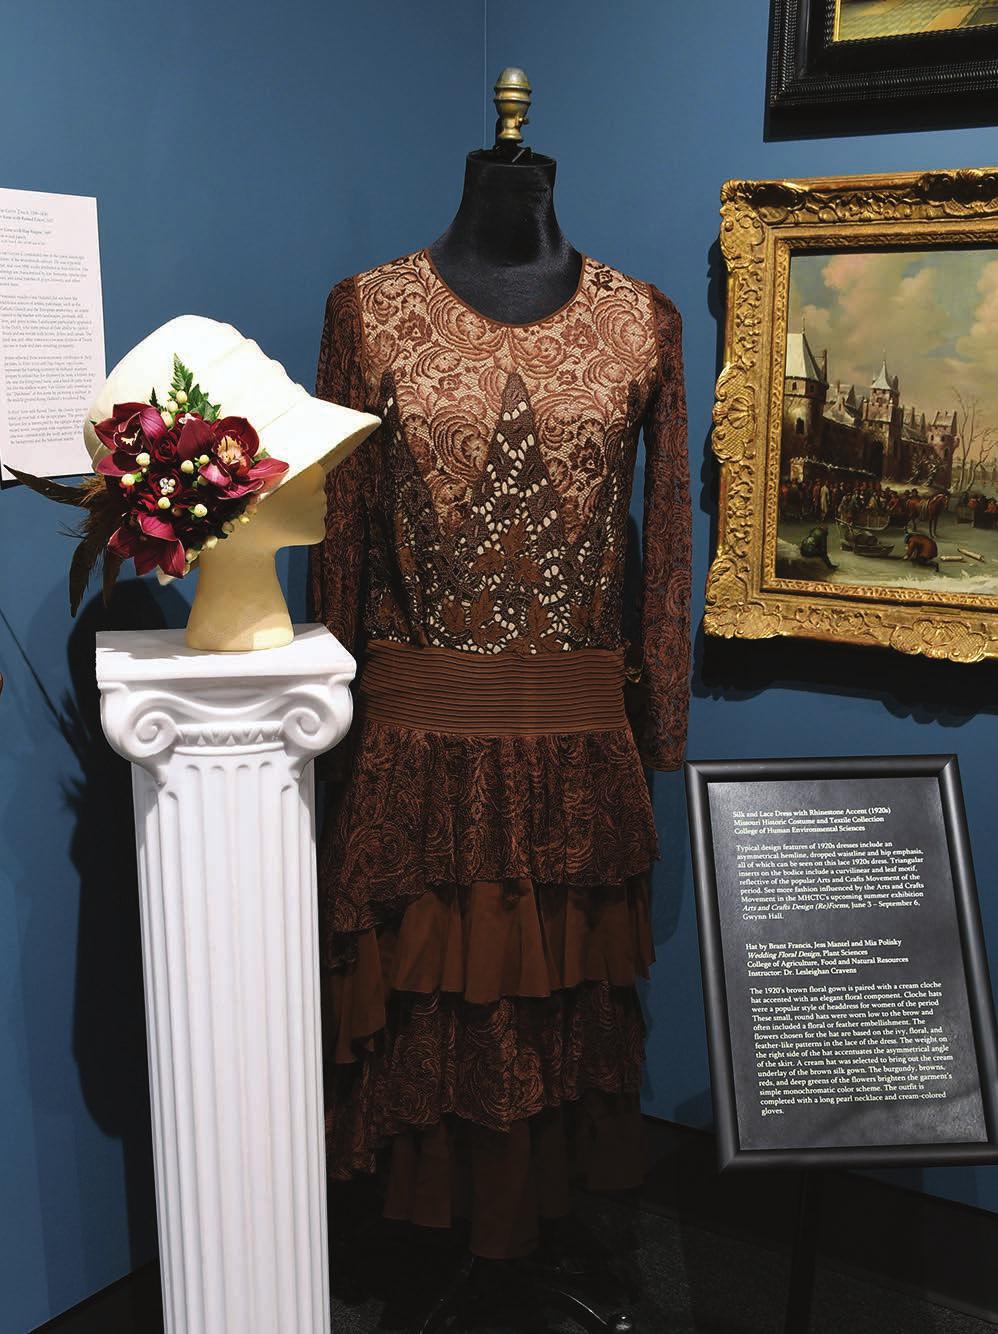 Dresses with a floral theme from The Missouri Historic Costume and Textile Collection at MU were